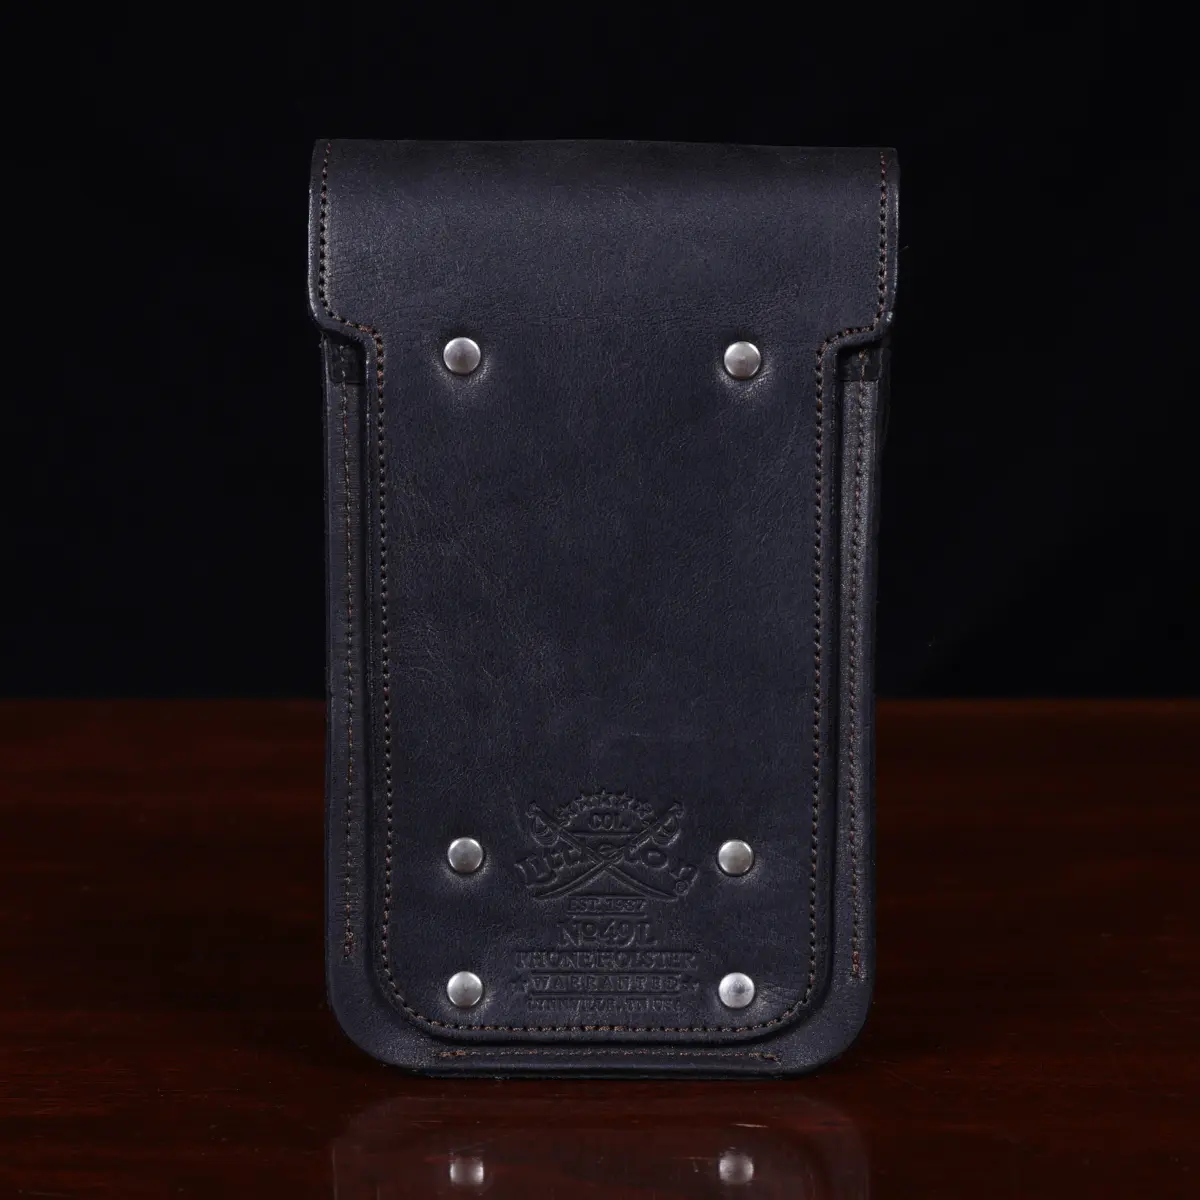 No 49l Phone Holster in black showing the back side